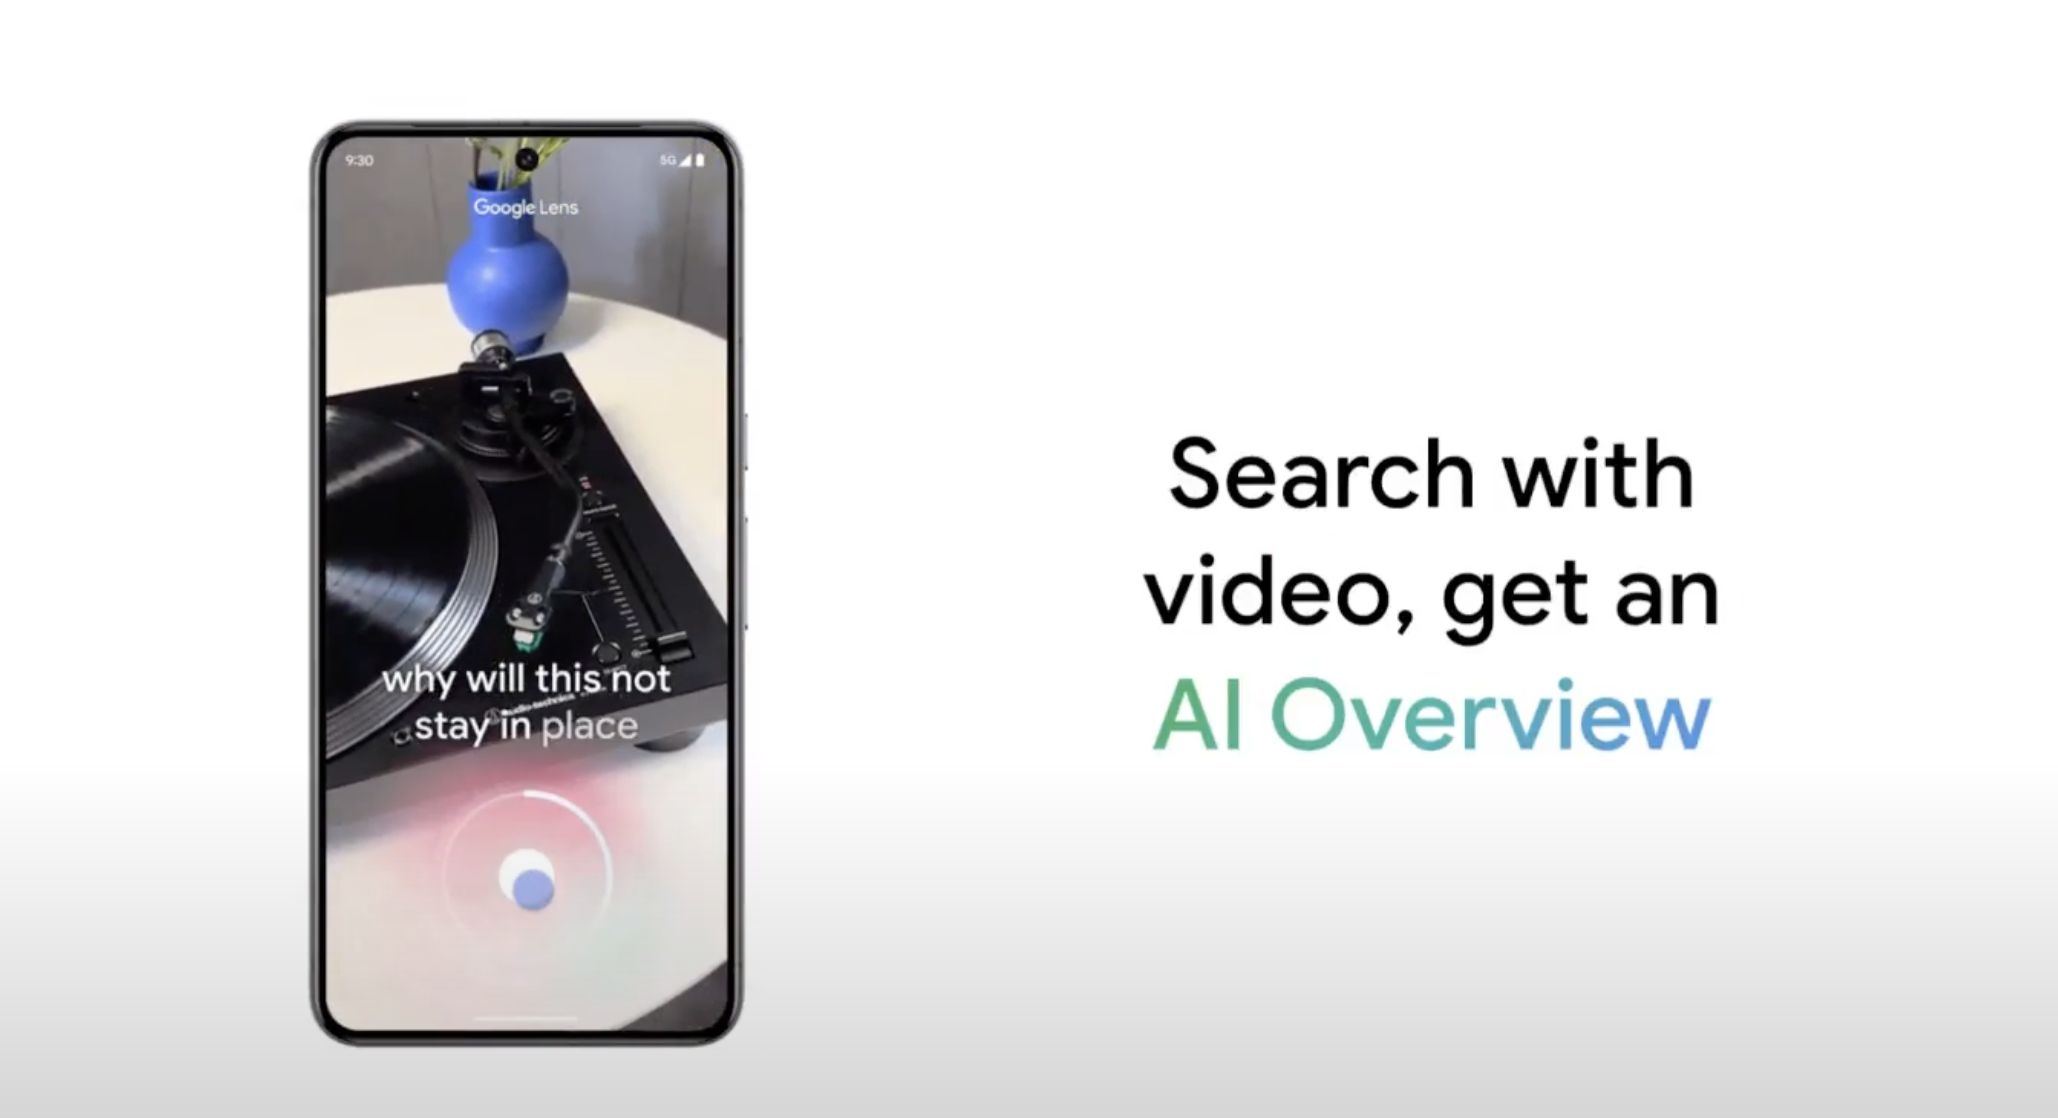 Google experiments with using video to search, thanks to Gemini AI